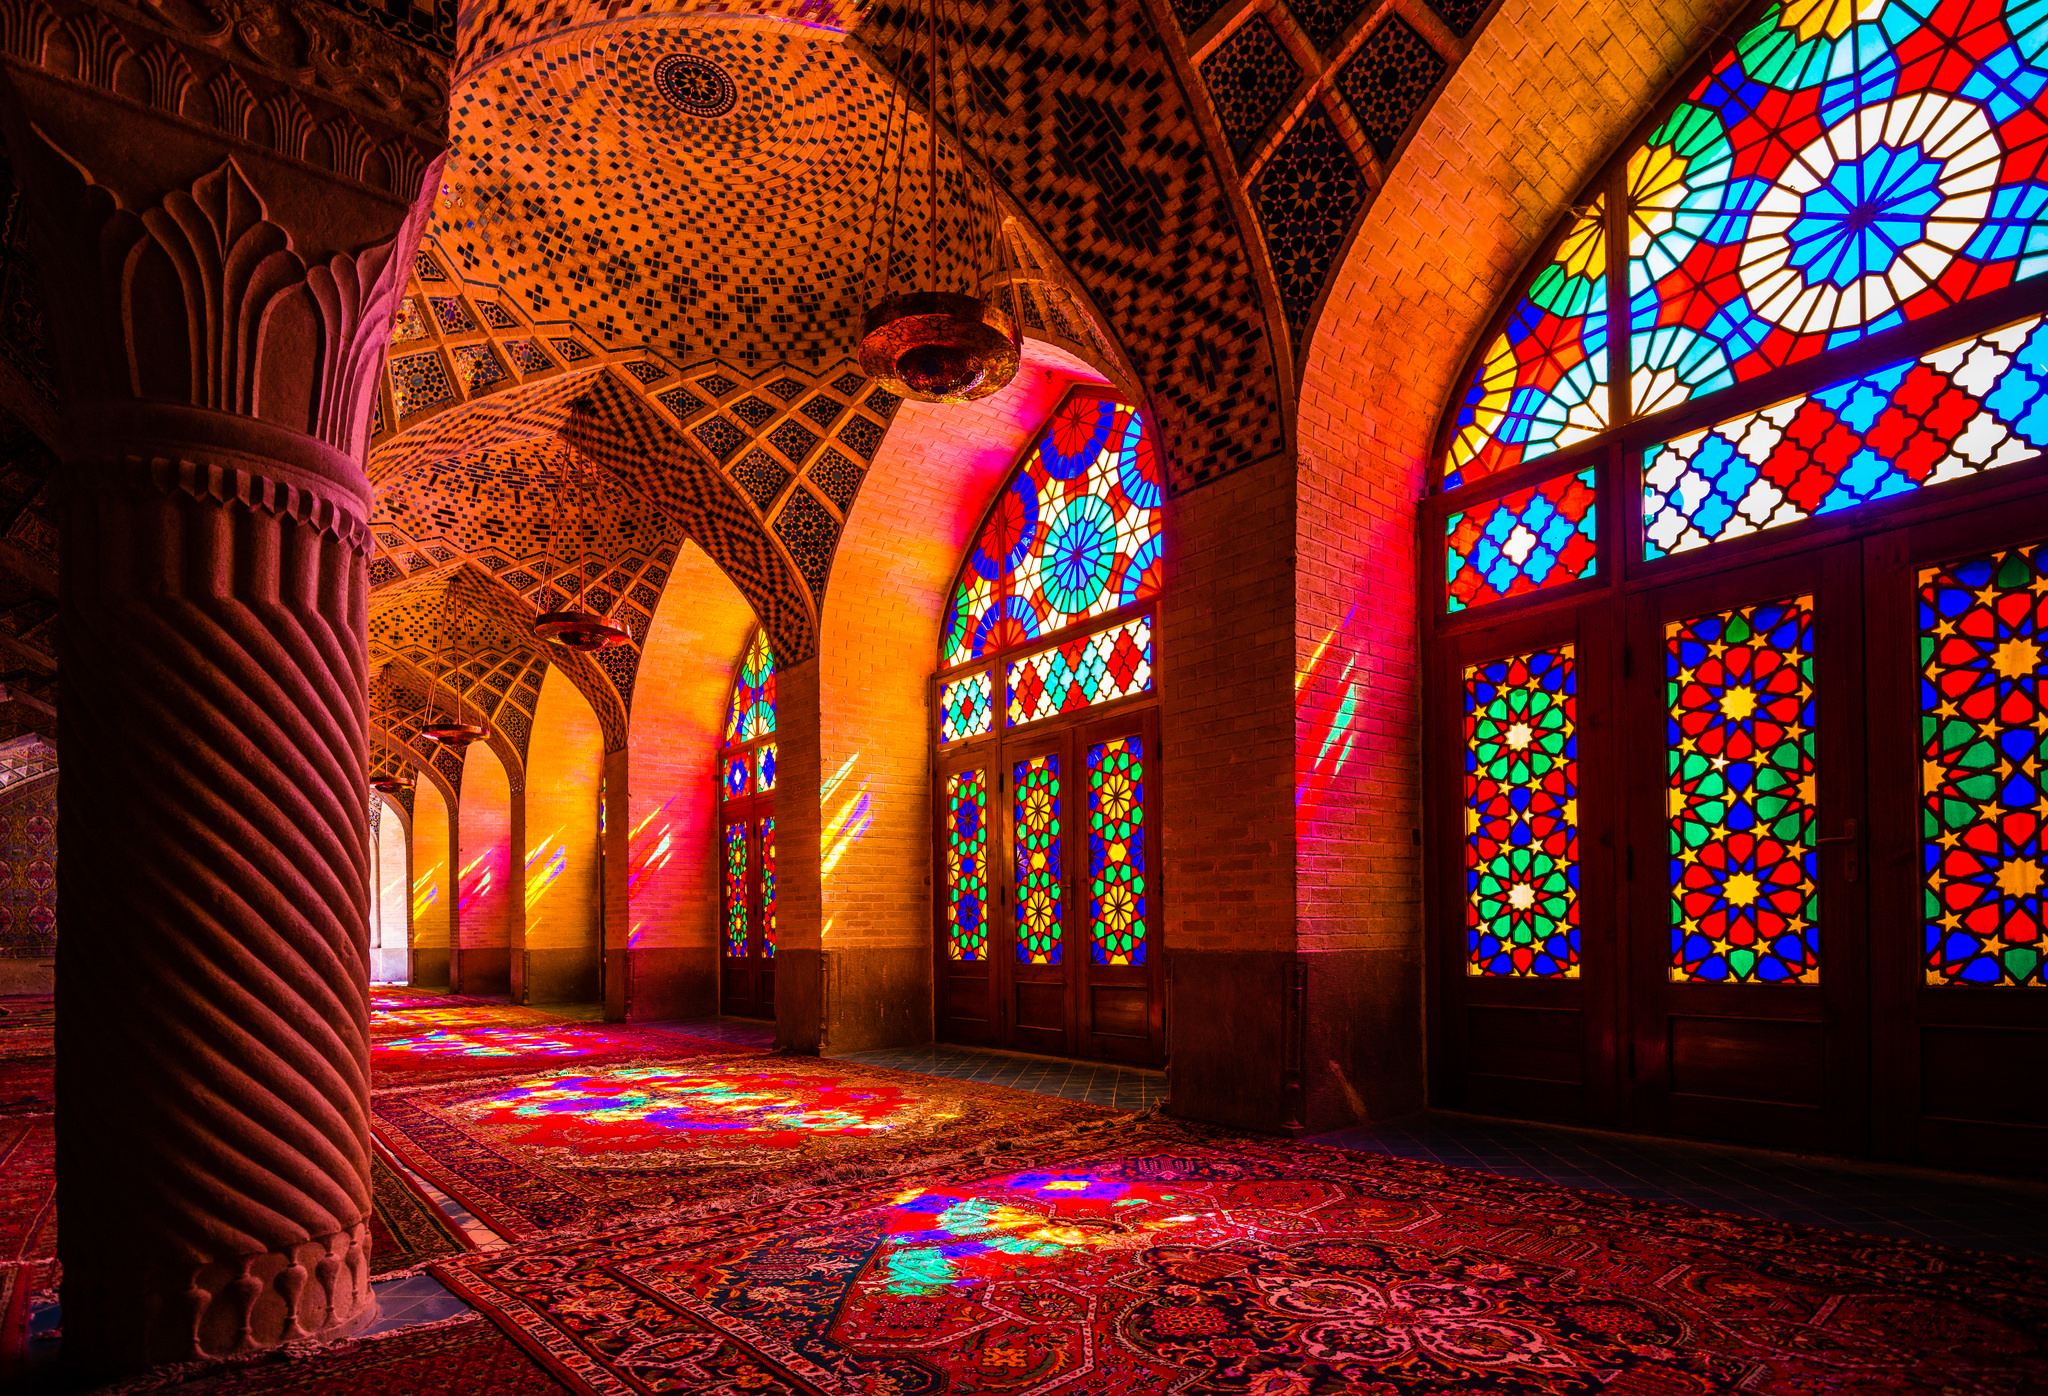 General 2048x1396 Nasir al-Mulk Mosque mosque architecture Islamic architecture Islam colorful stained glass column interior